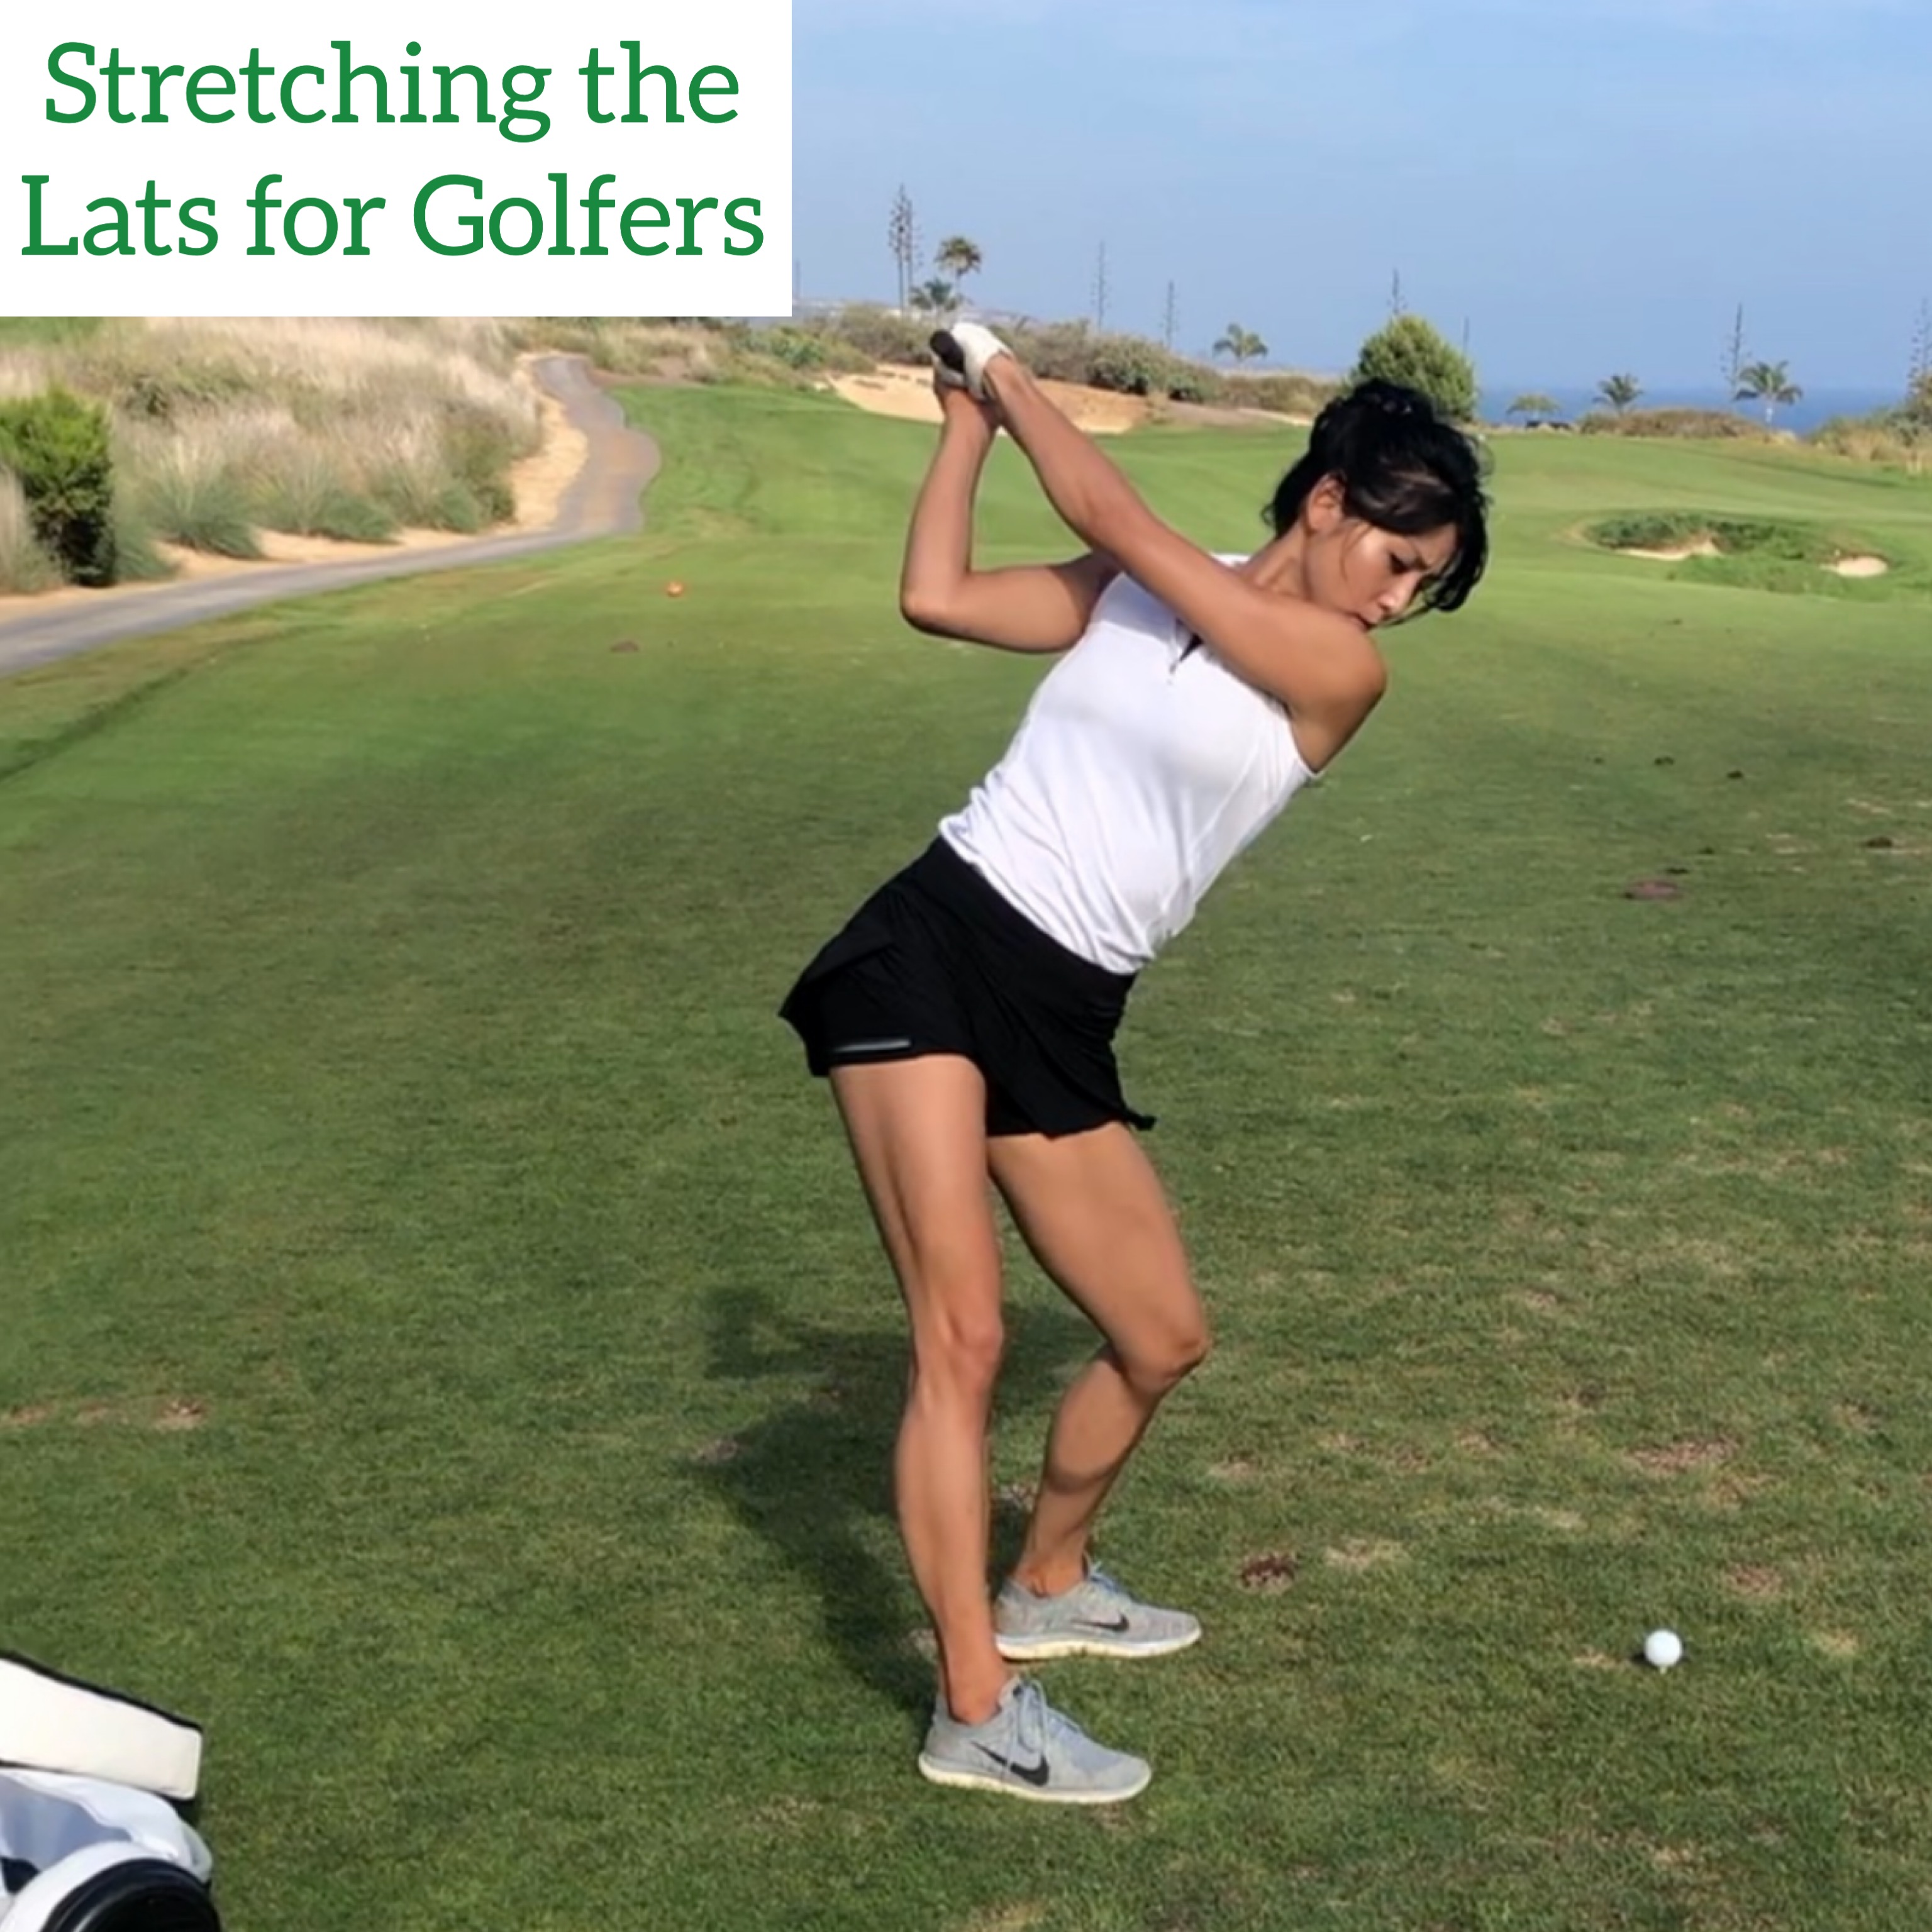 Stretching the Lats for Golfers